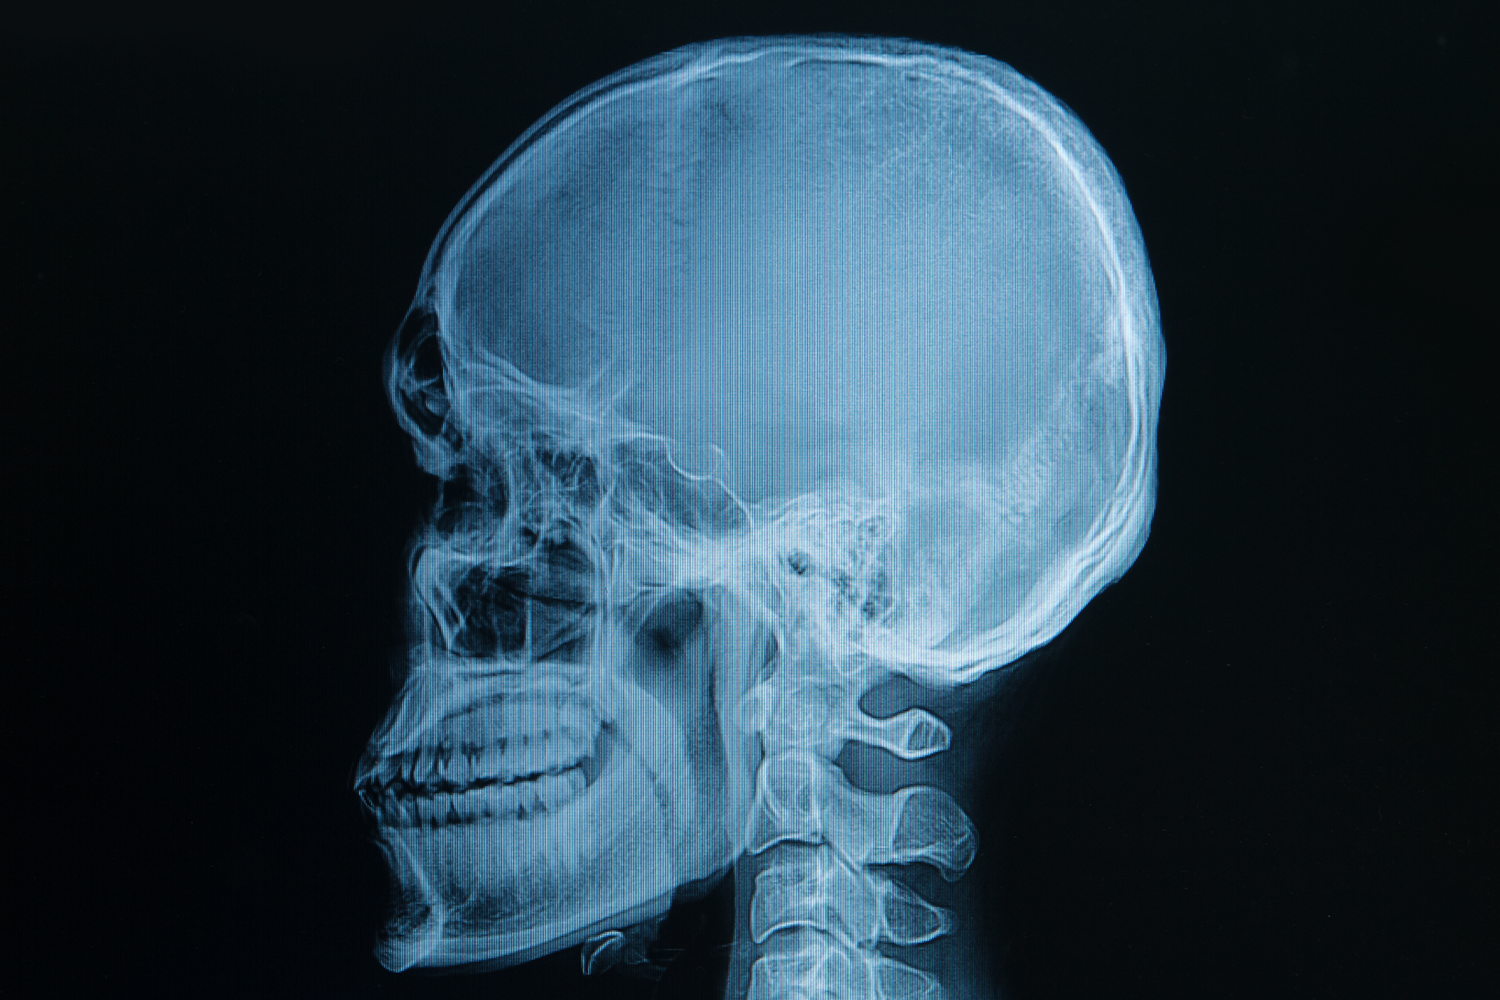 Blunt Force Trauma to the Head: Causes and Effects